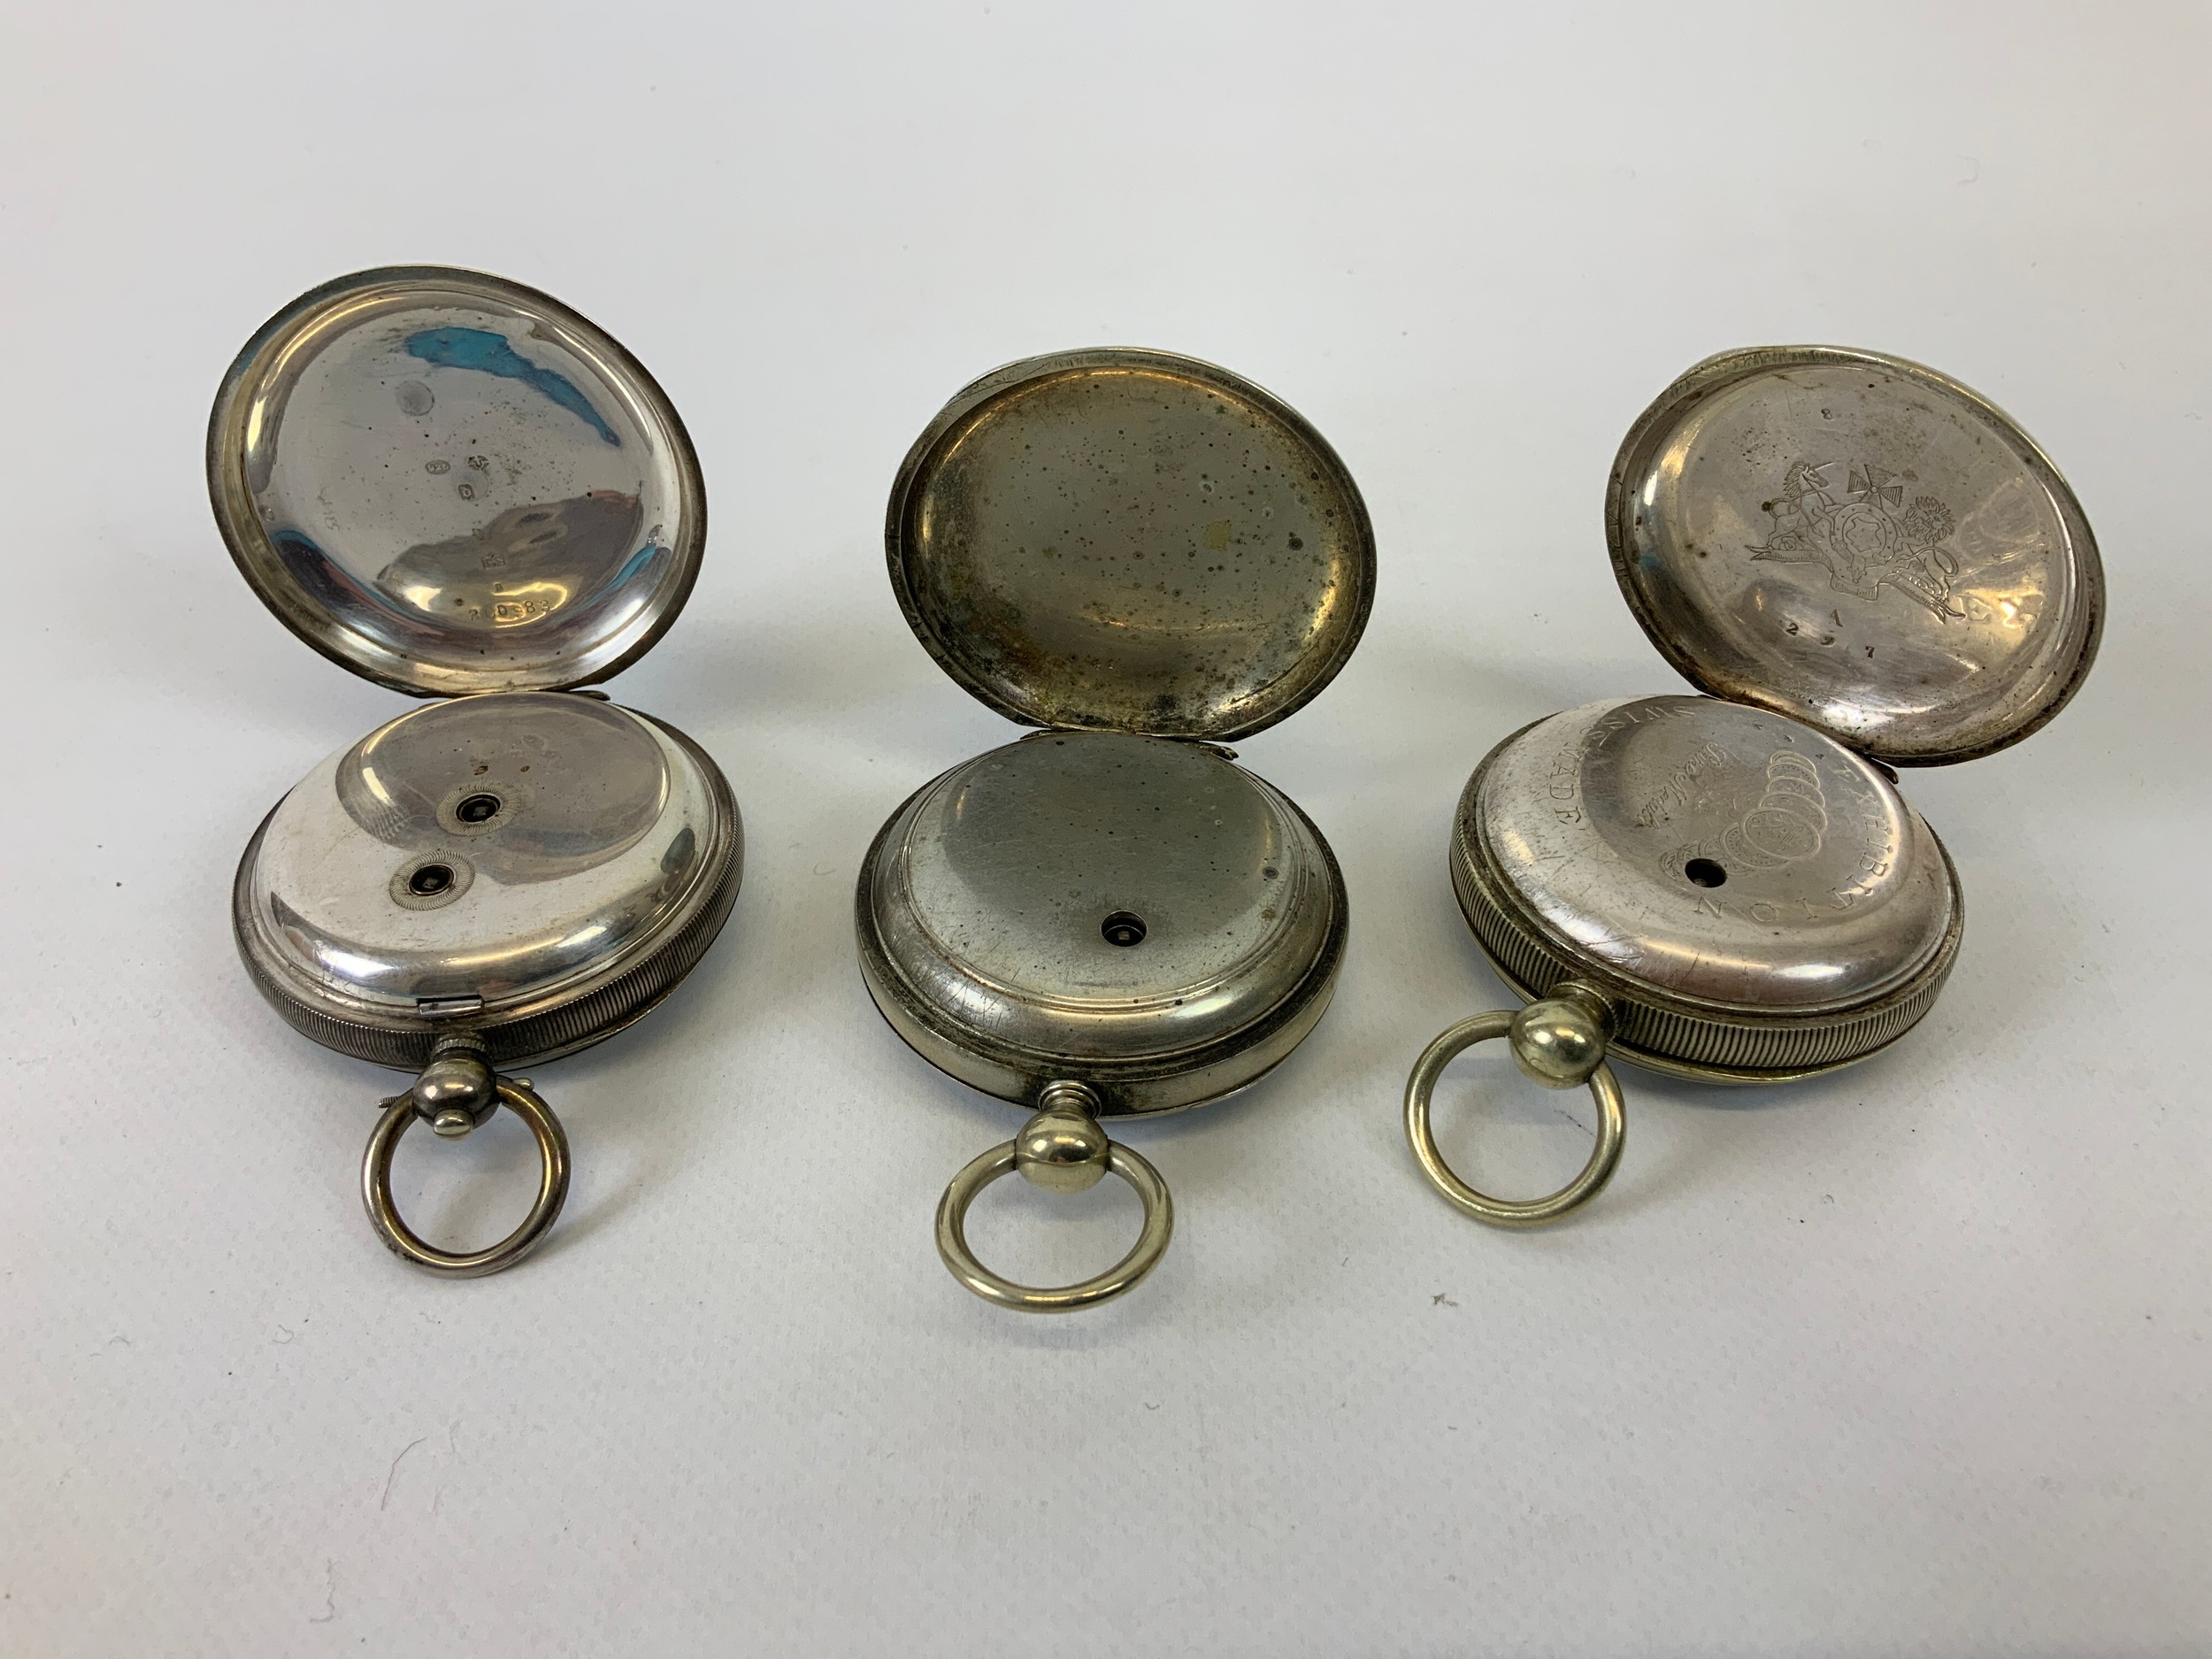 4x Pocket Watches - Image 2 of 3